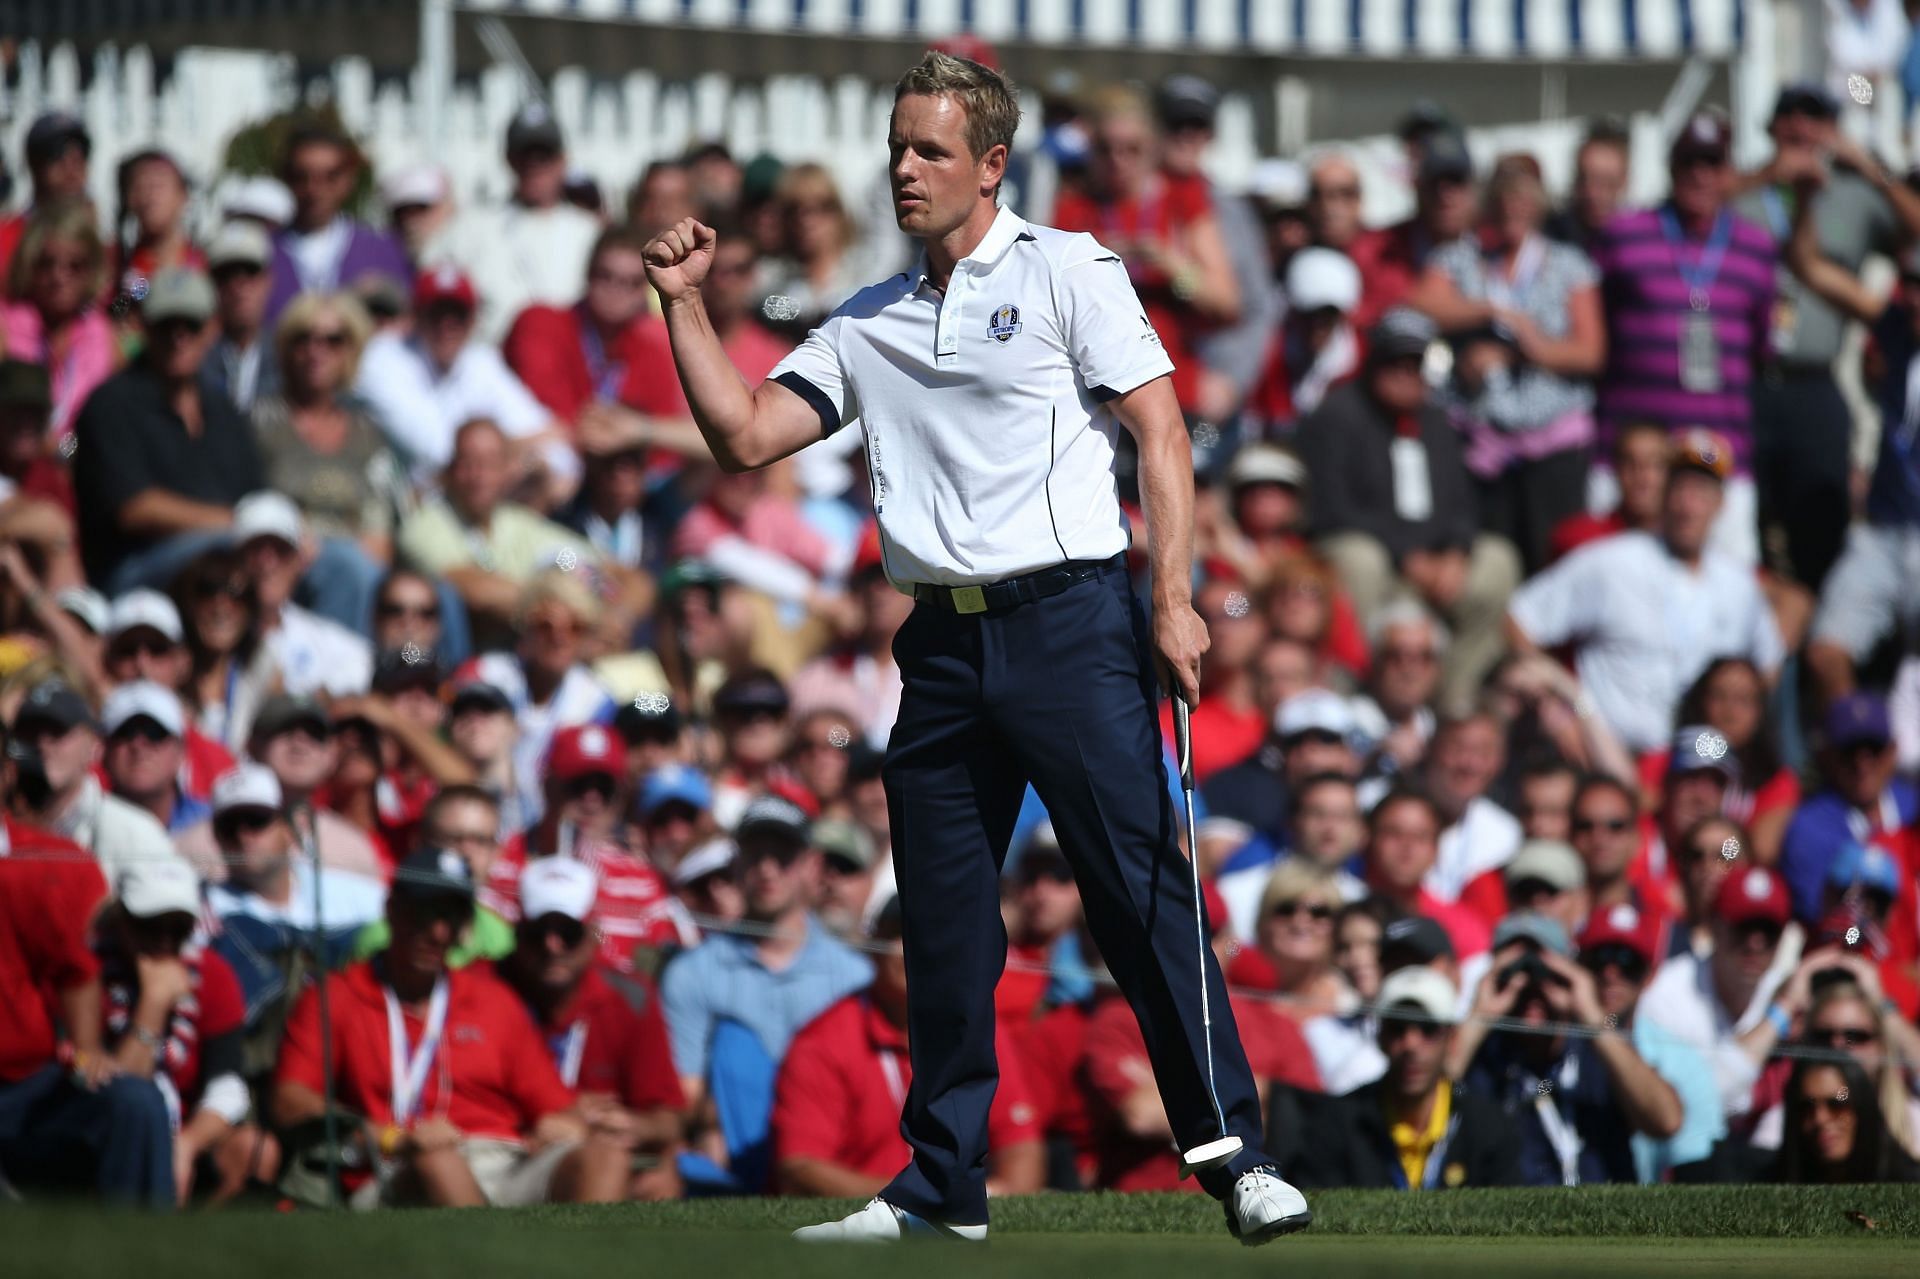 Luke Donald at the Ryder Cup 2012 (Image via Getty)